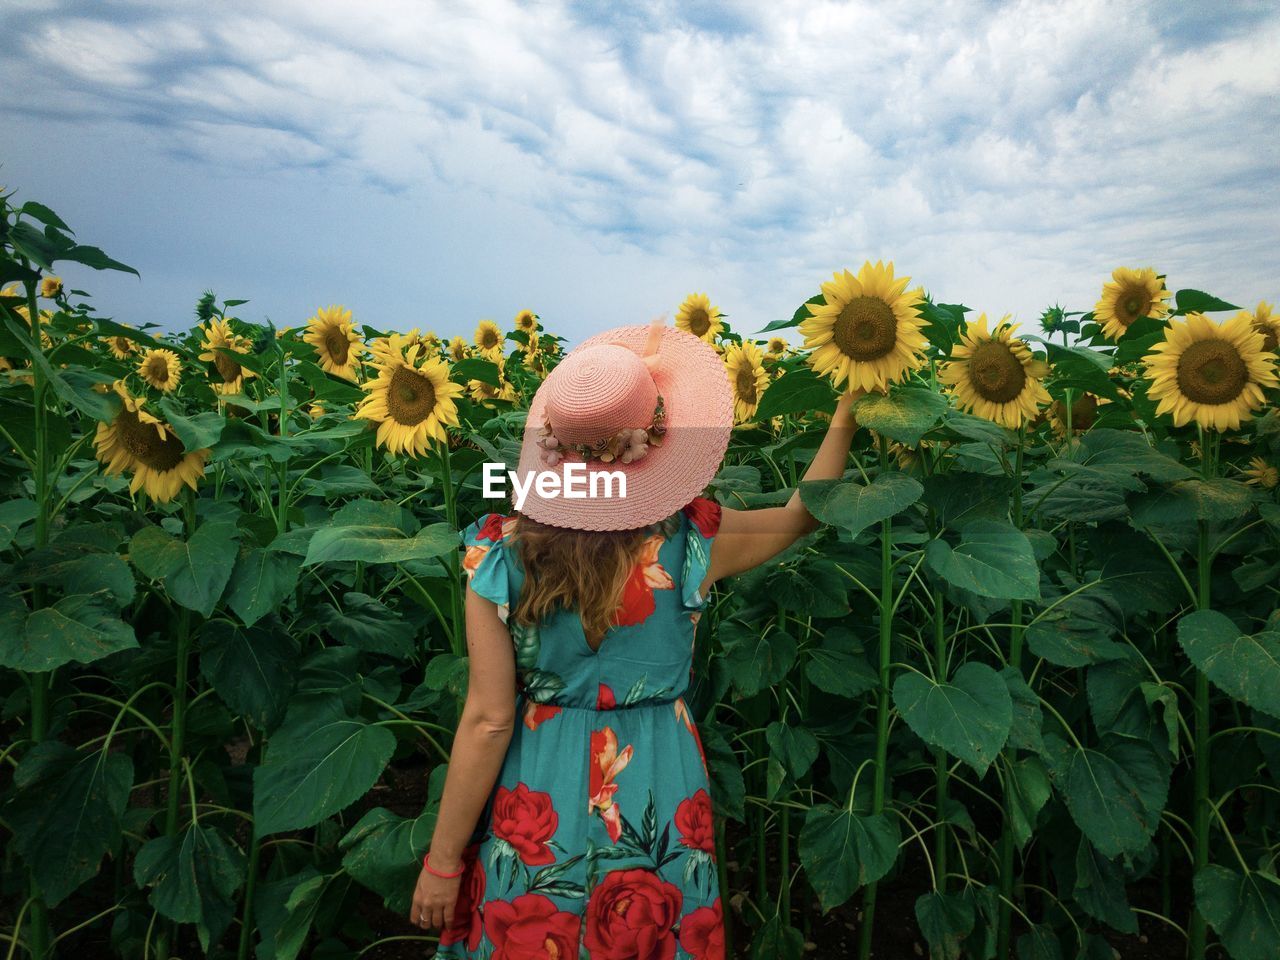 Rear view of woman wearing dress and sun hat in a field of sunflowers on a cloudy day